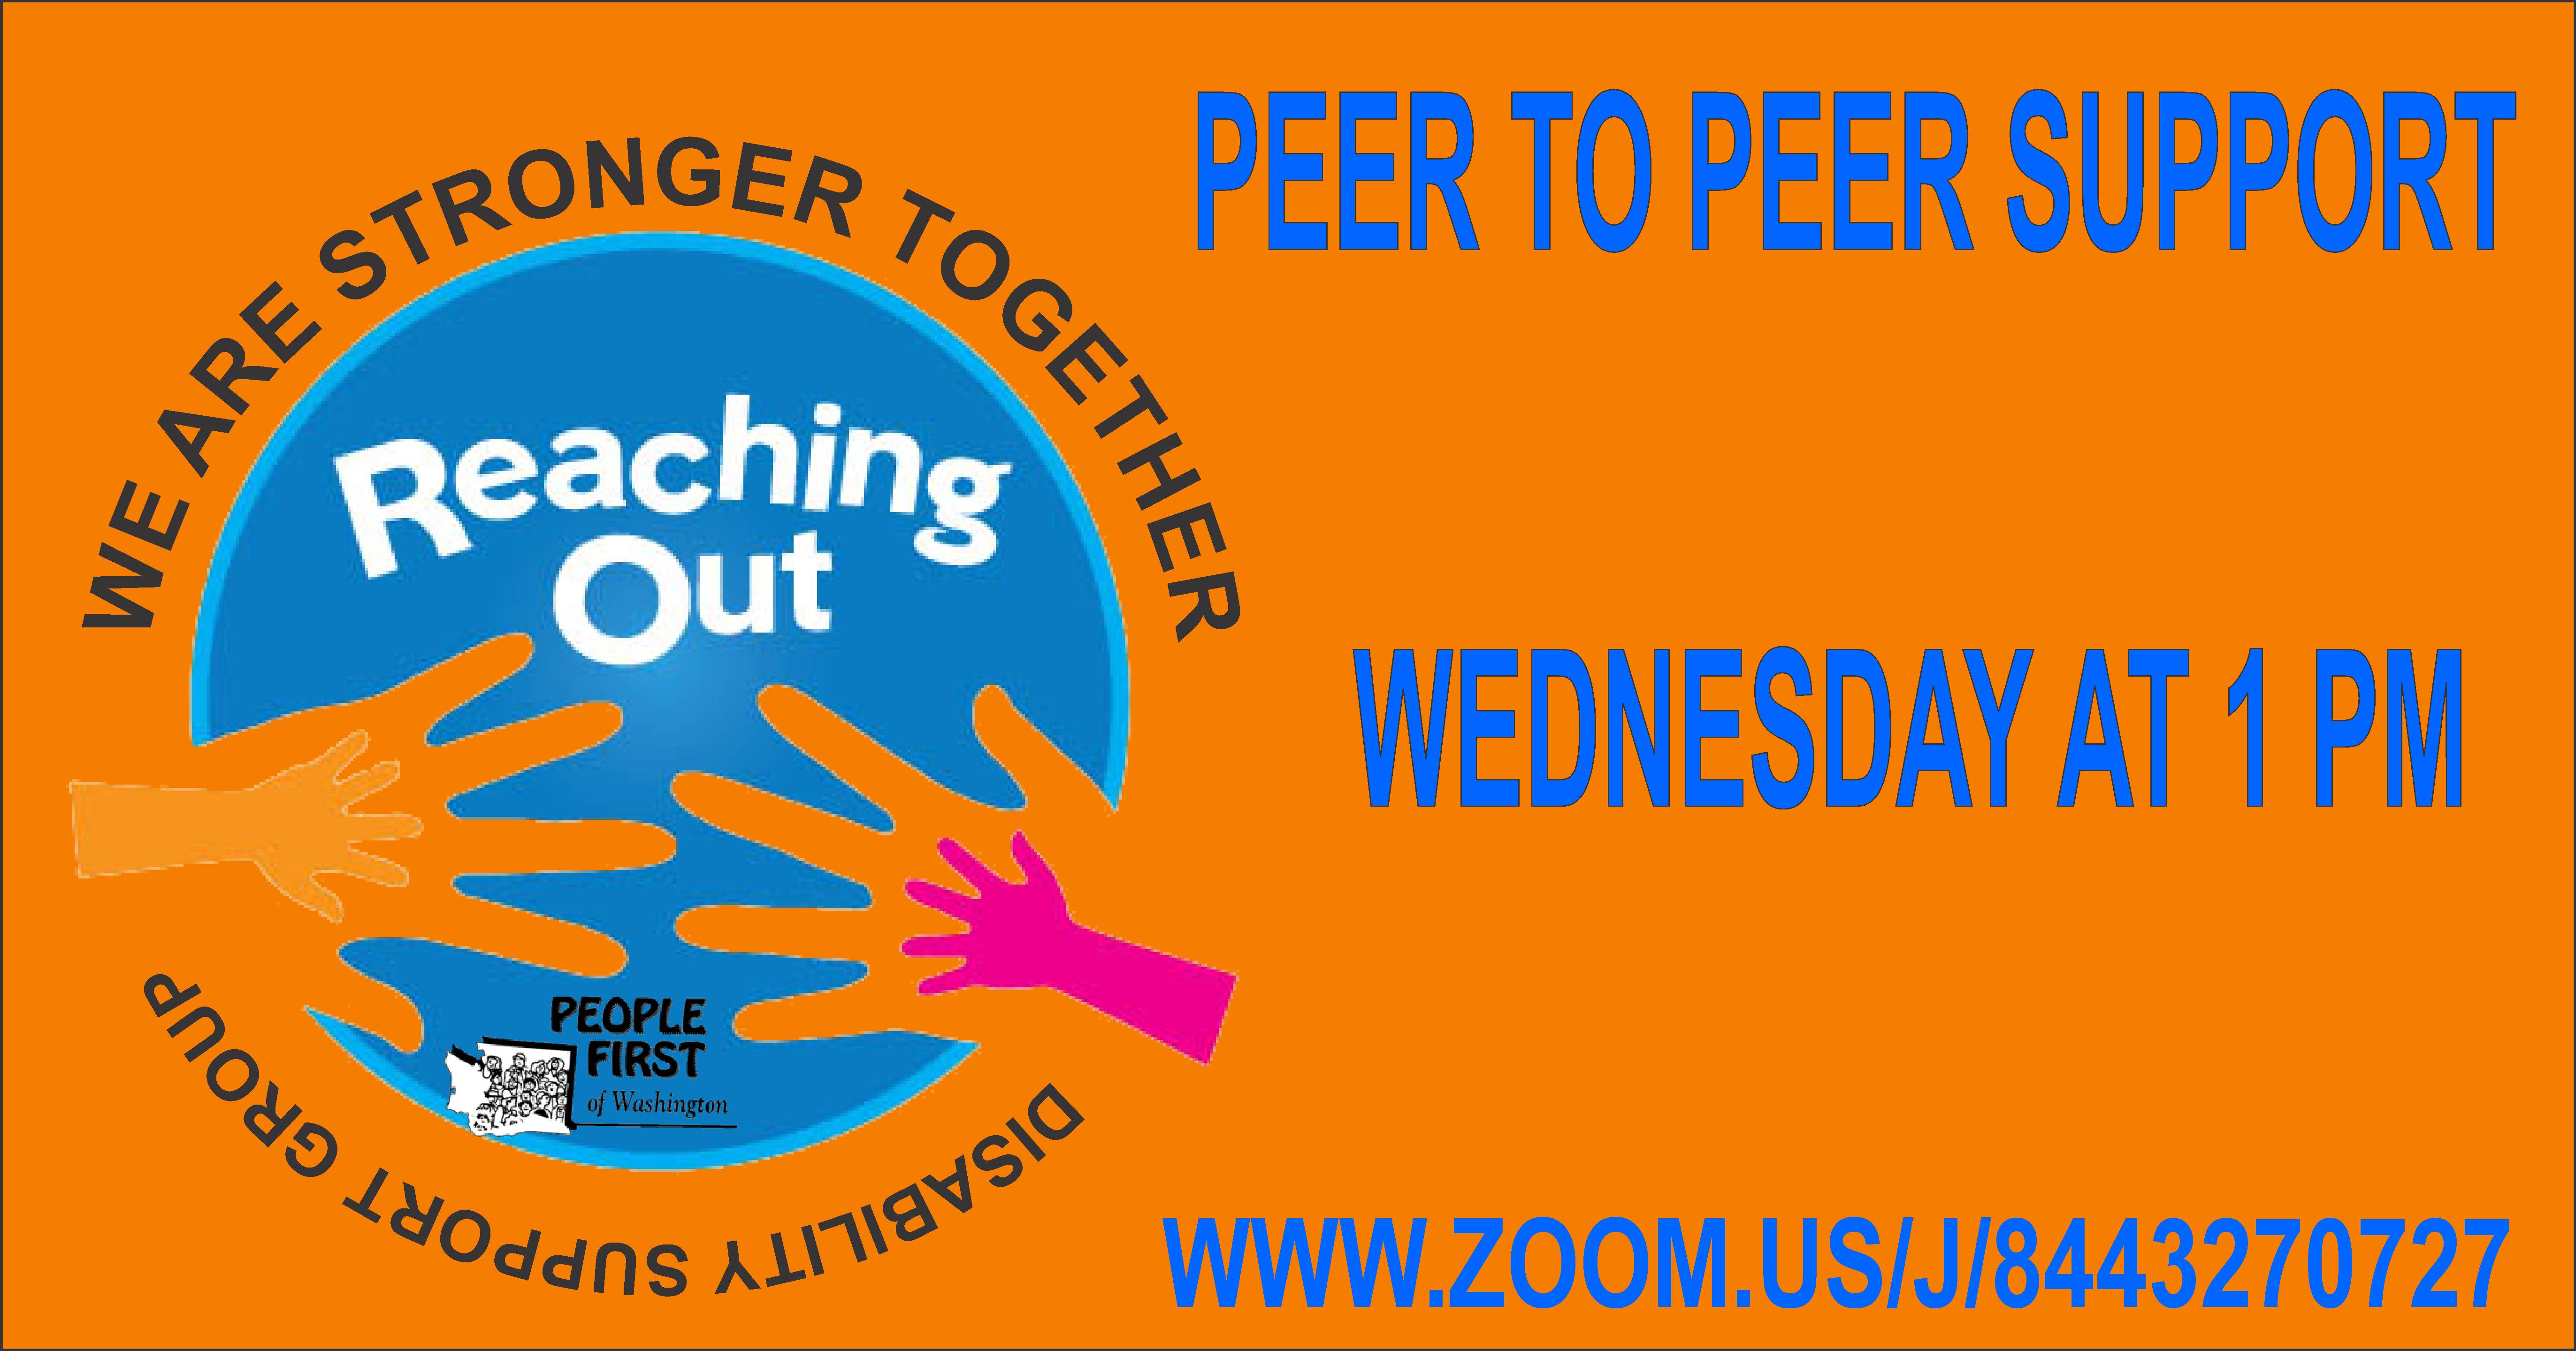 Link to Peer-to-peer support. Image shows hands reaching toward one another.